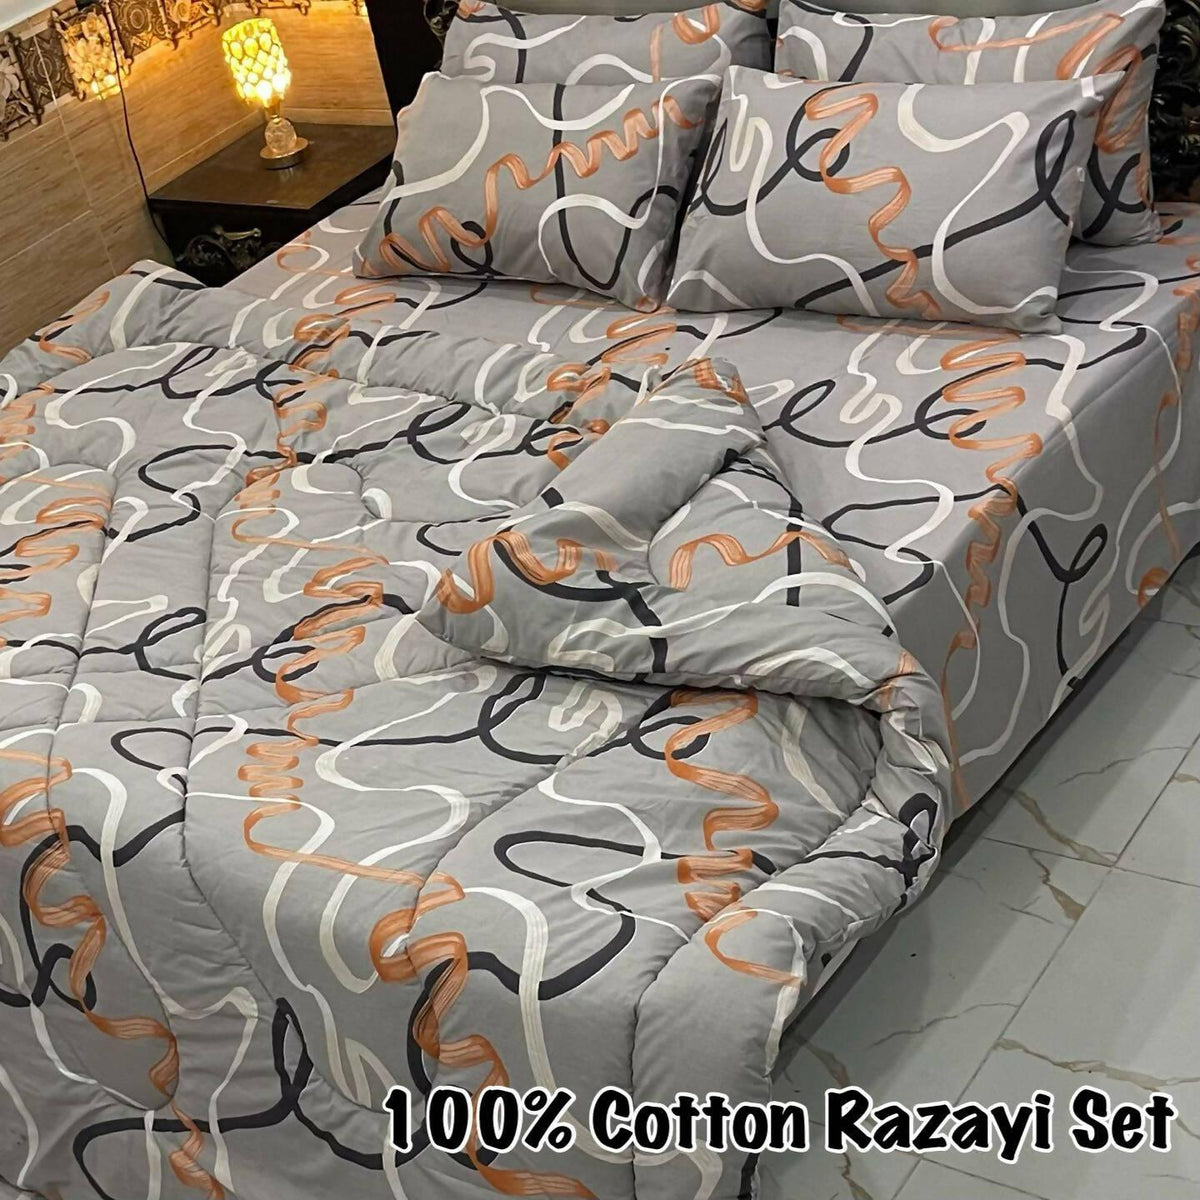 King Size E-cotton Bedsheet in multi - ValueBox